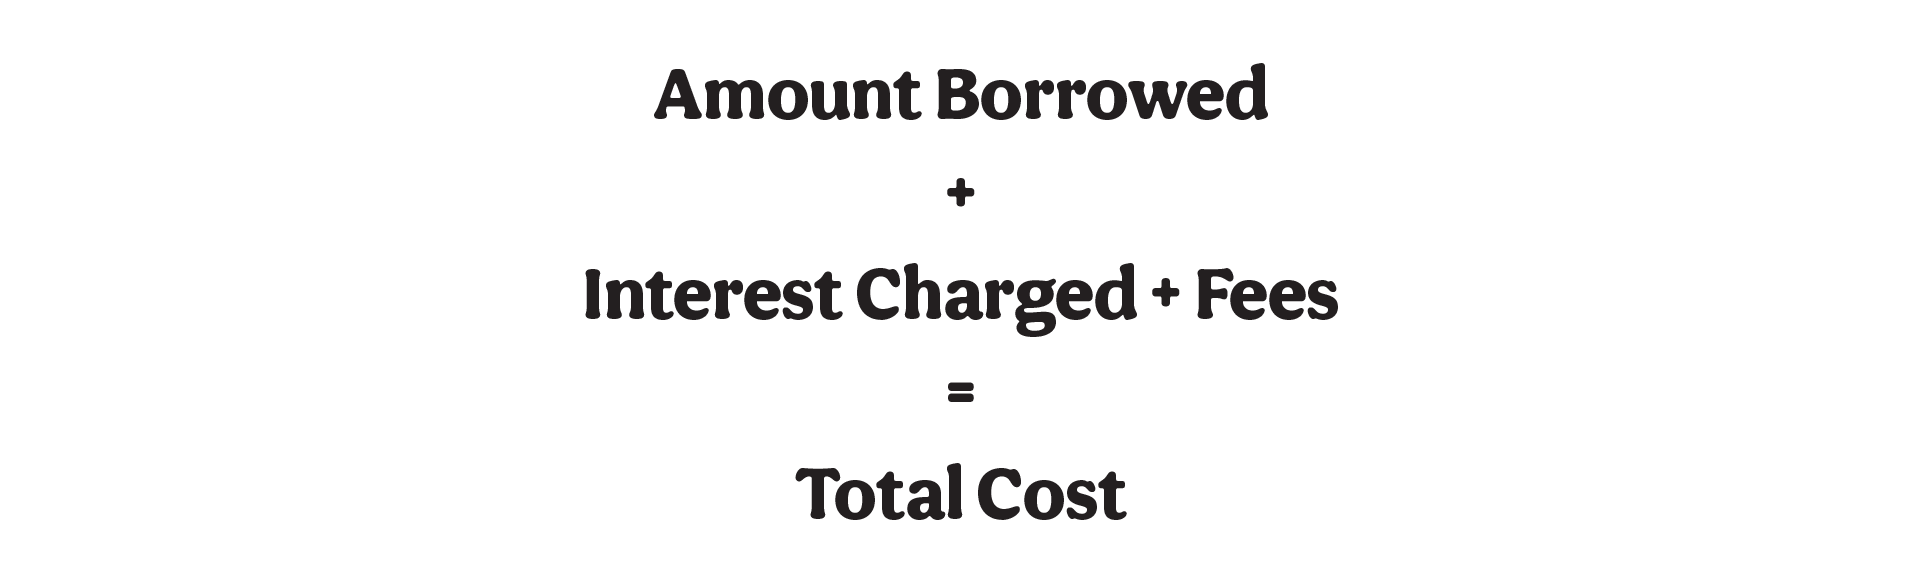 Amount Borrowed + Interest Charged + Fees = Total Cost